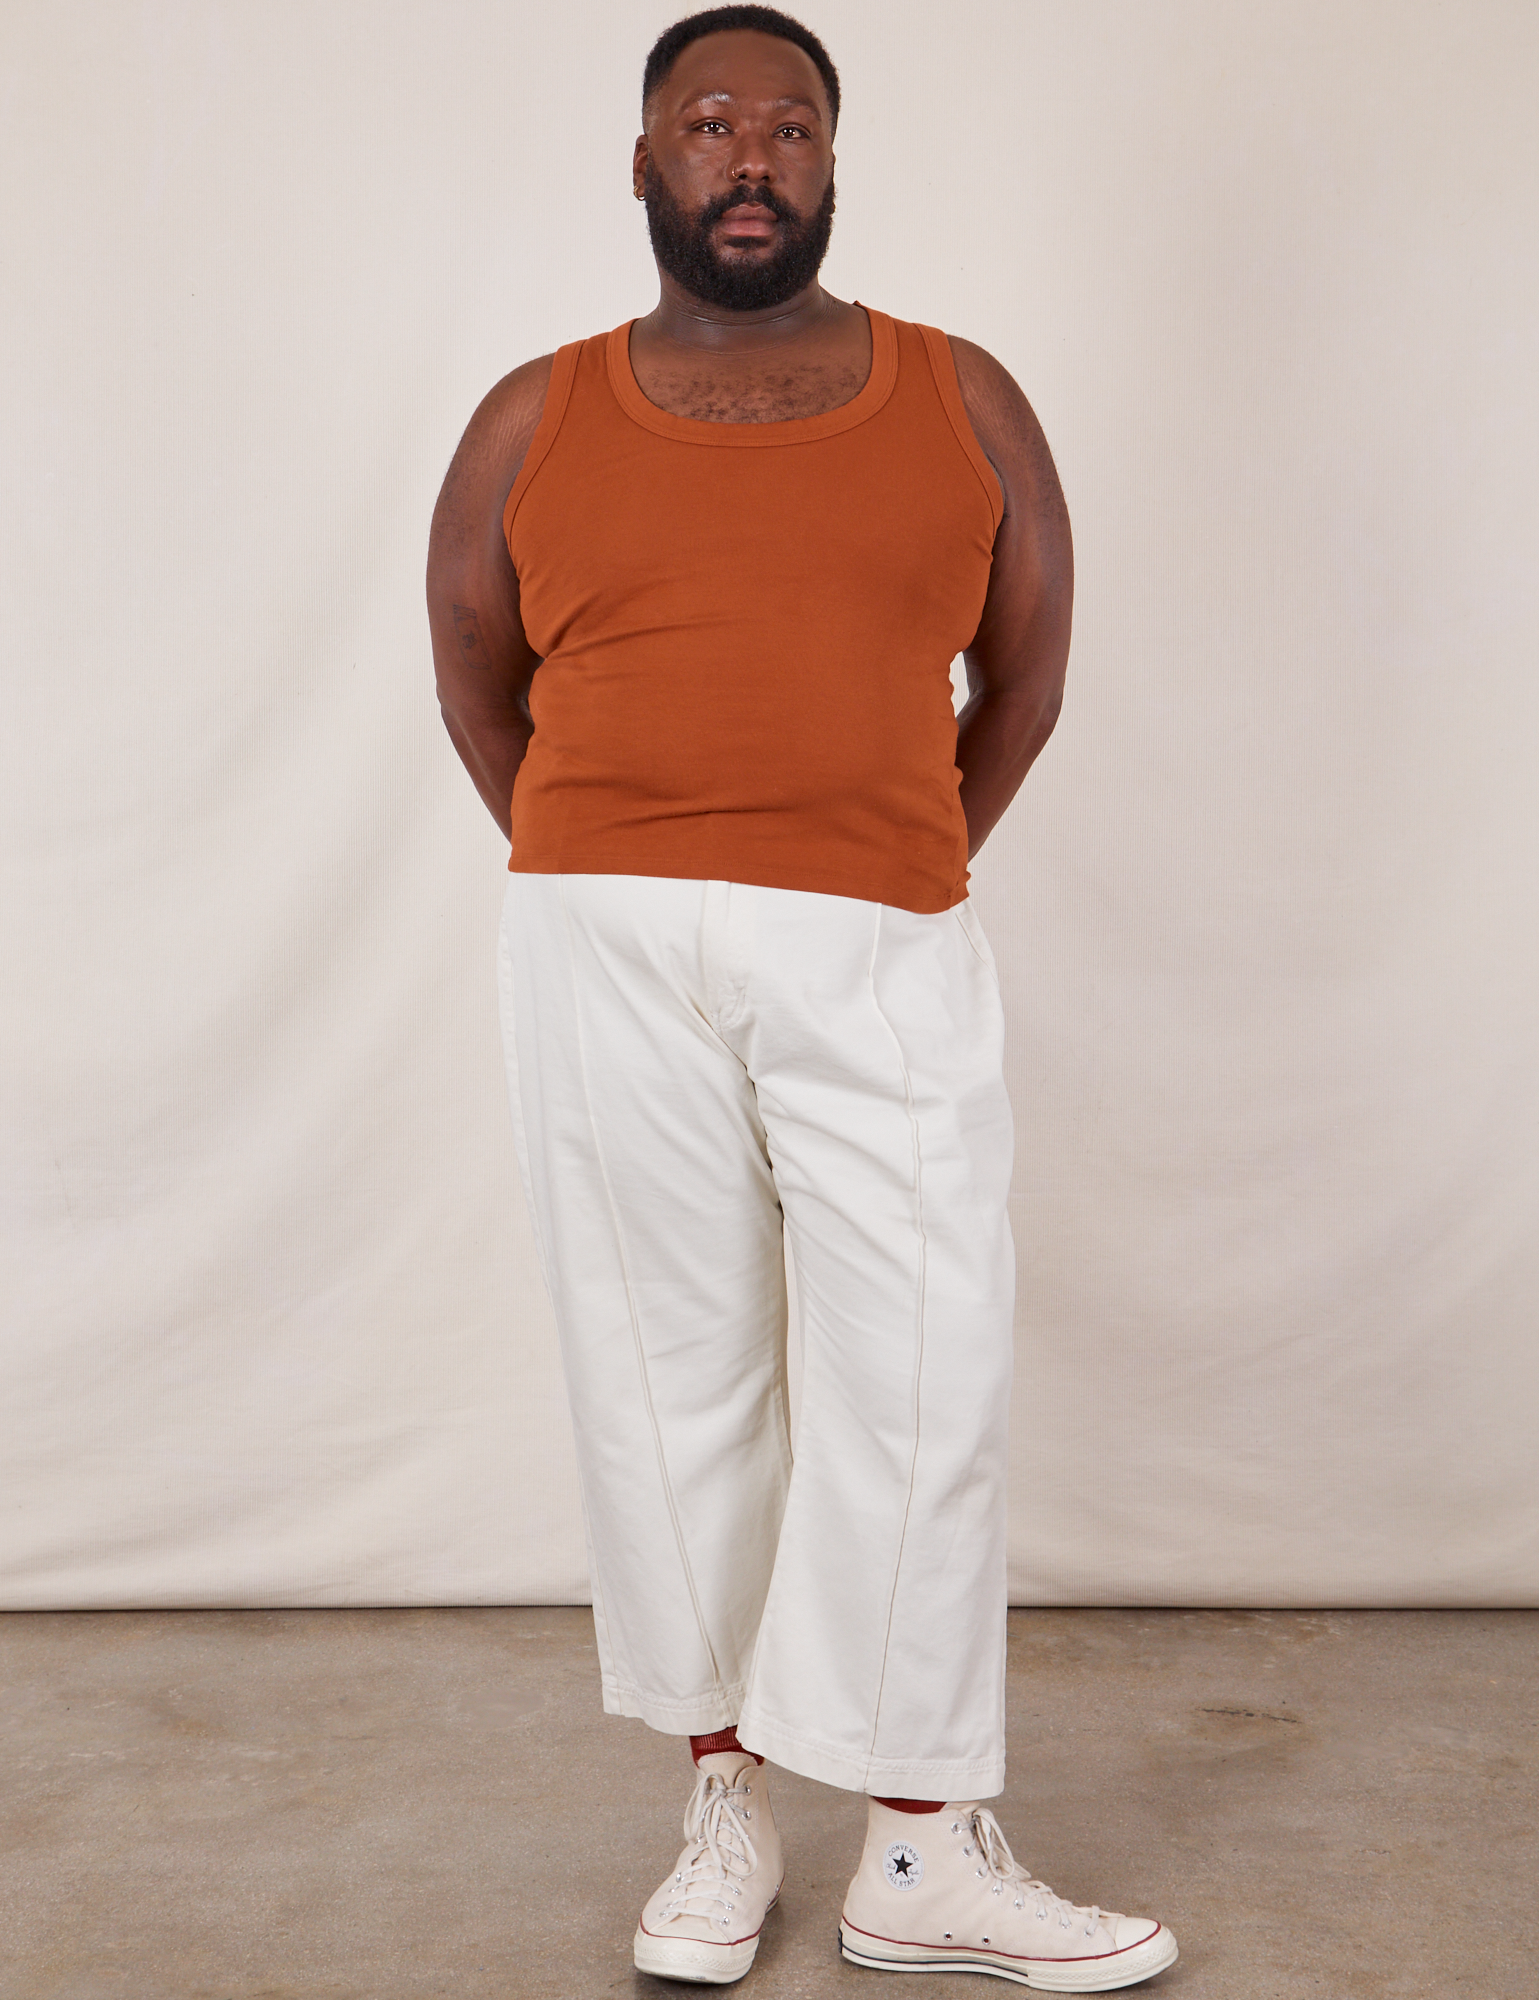 Elijah is 6’0 and wearing 3XL Tank Top in Burnt Terracotta paired with vintage tee off-white Western pants